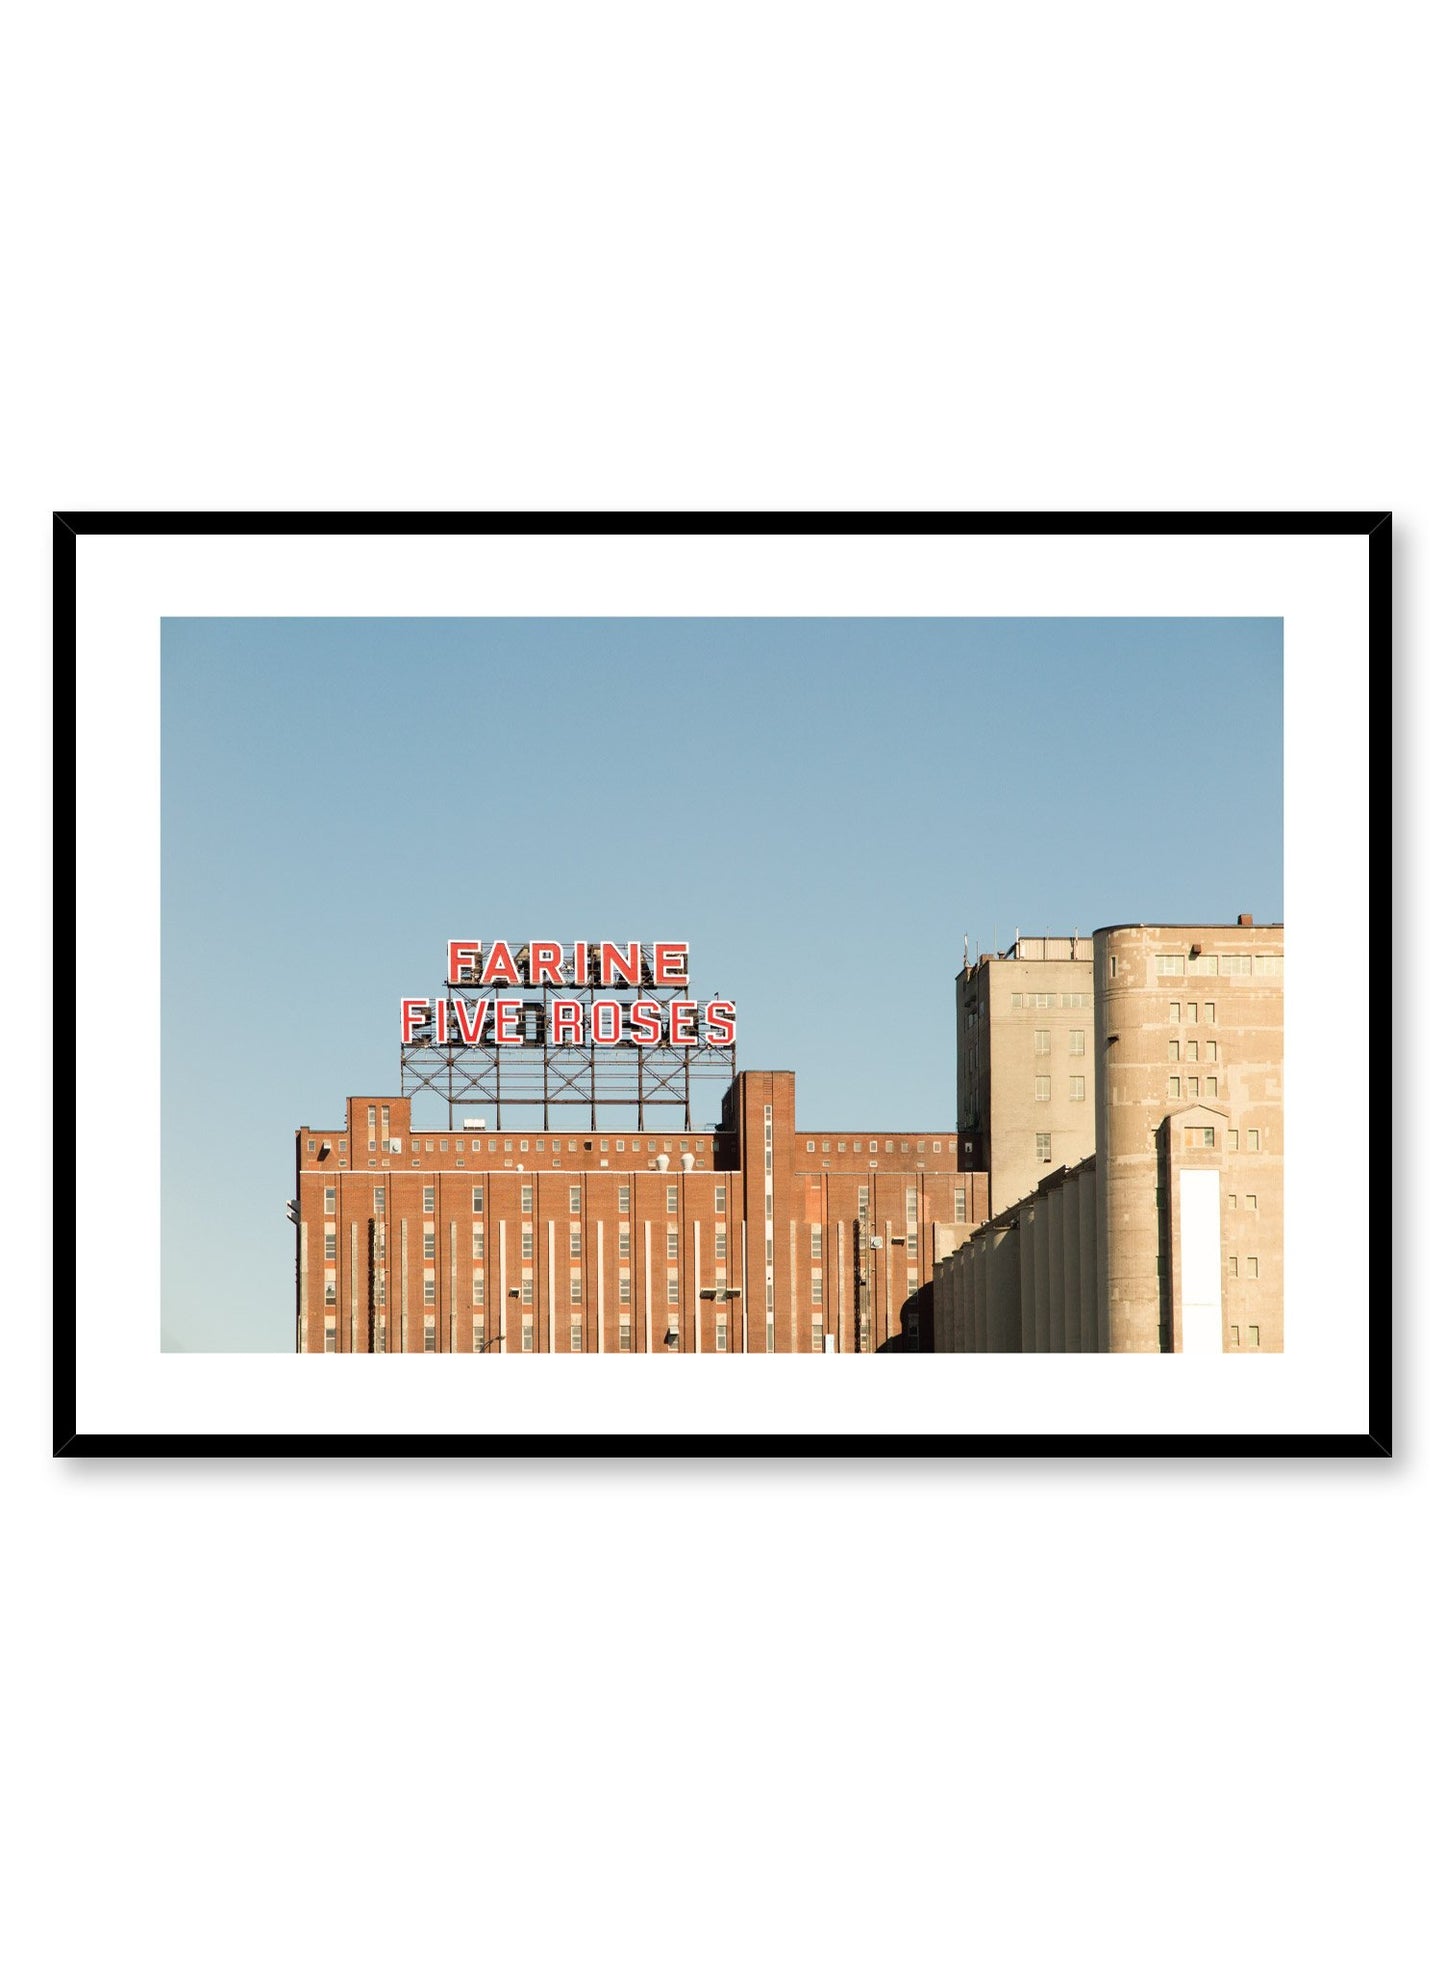 Minimalist design poster by Opposite Wall with urban photography of Montreal Farine Five Roses